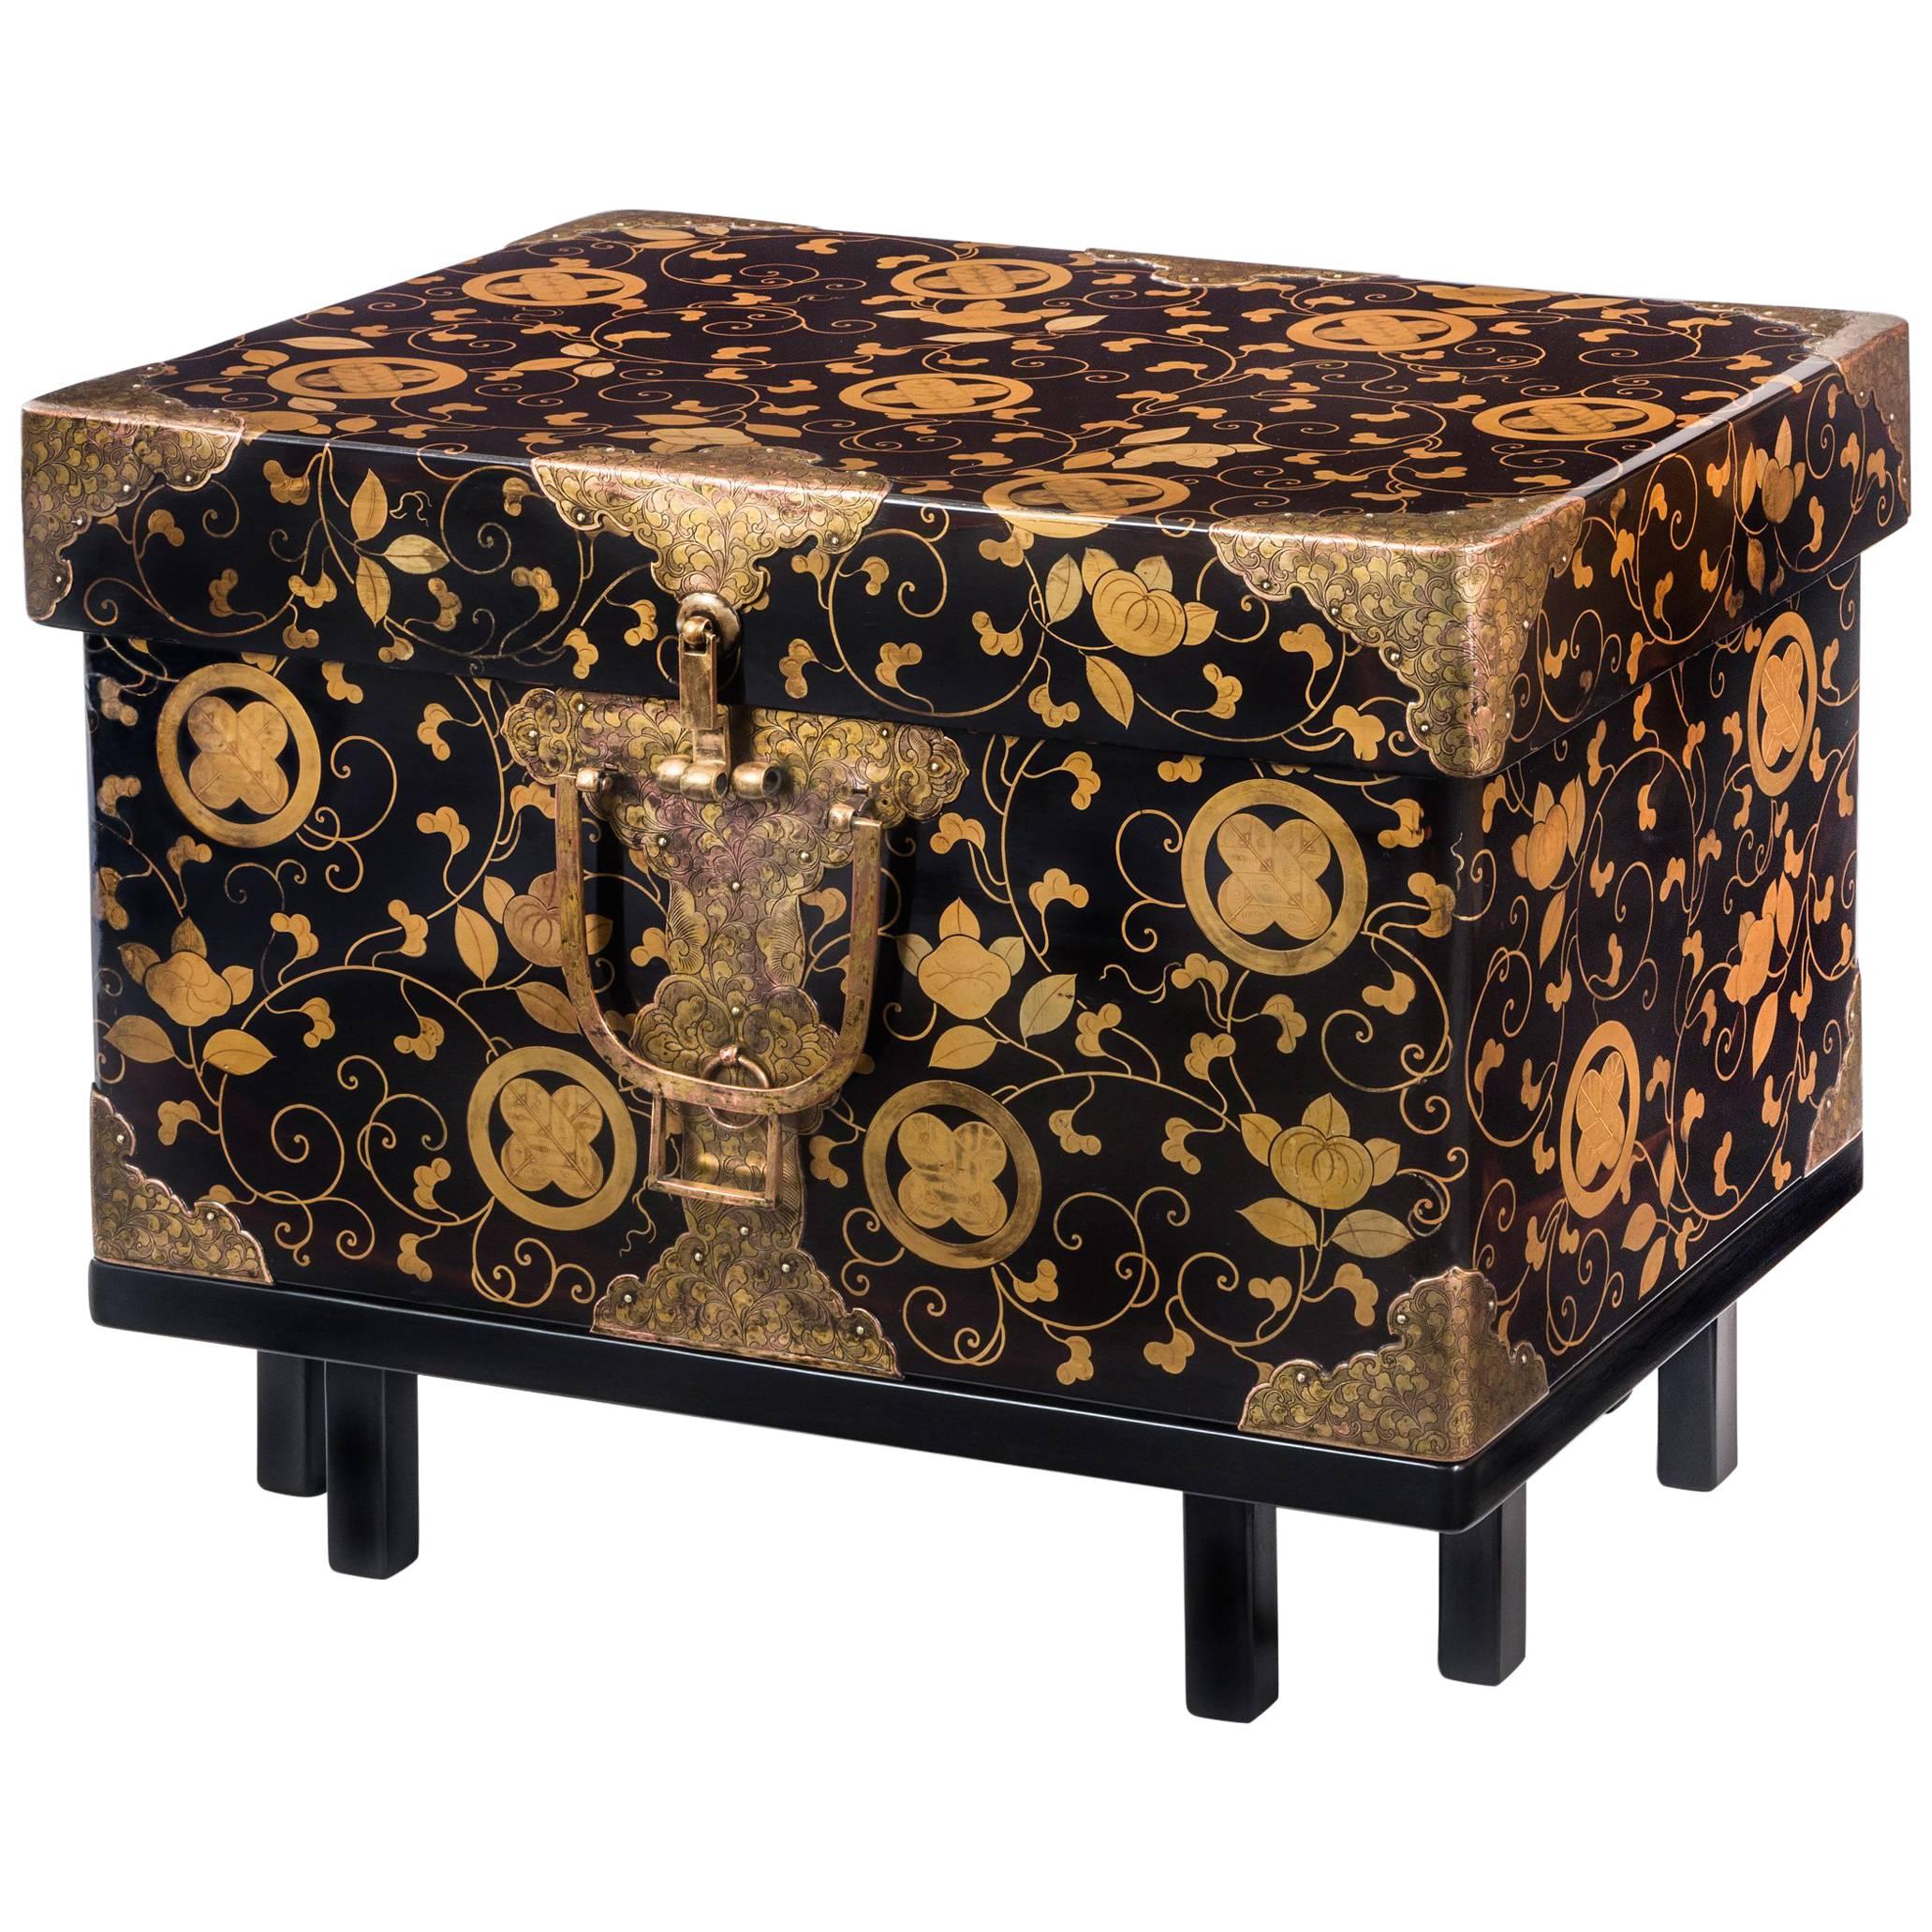 Japanese Gilt Metal Mounted and Lacquer Hasami-Bako (Robe Chest / Box) For Sale